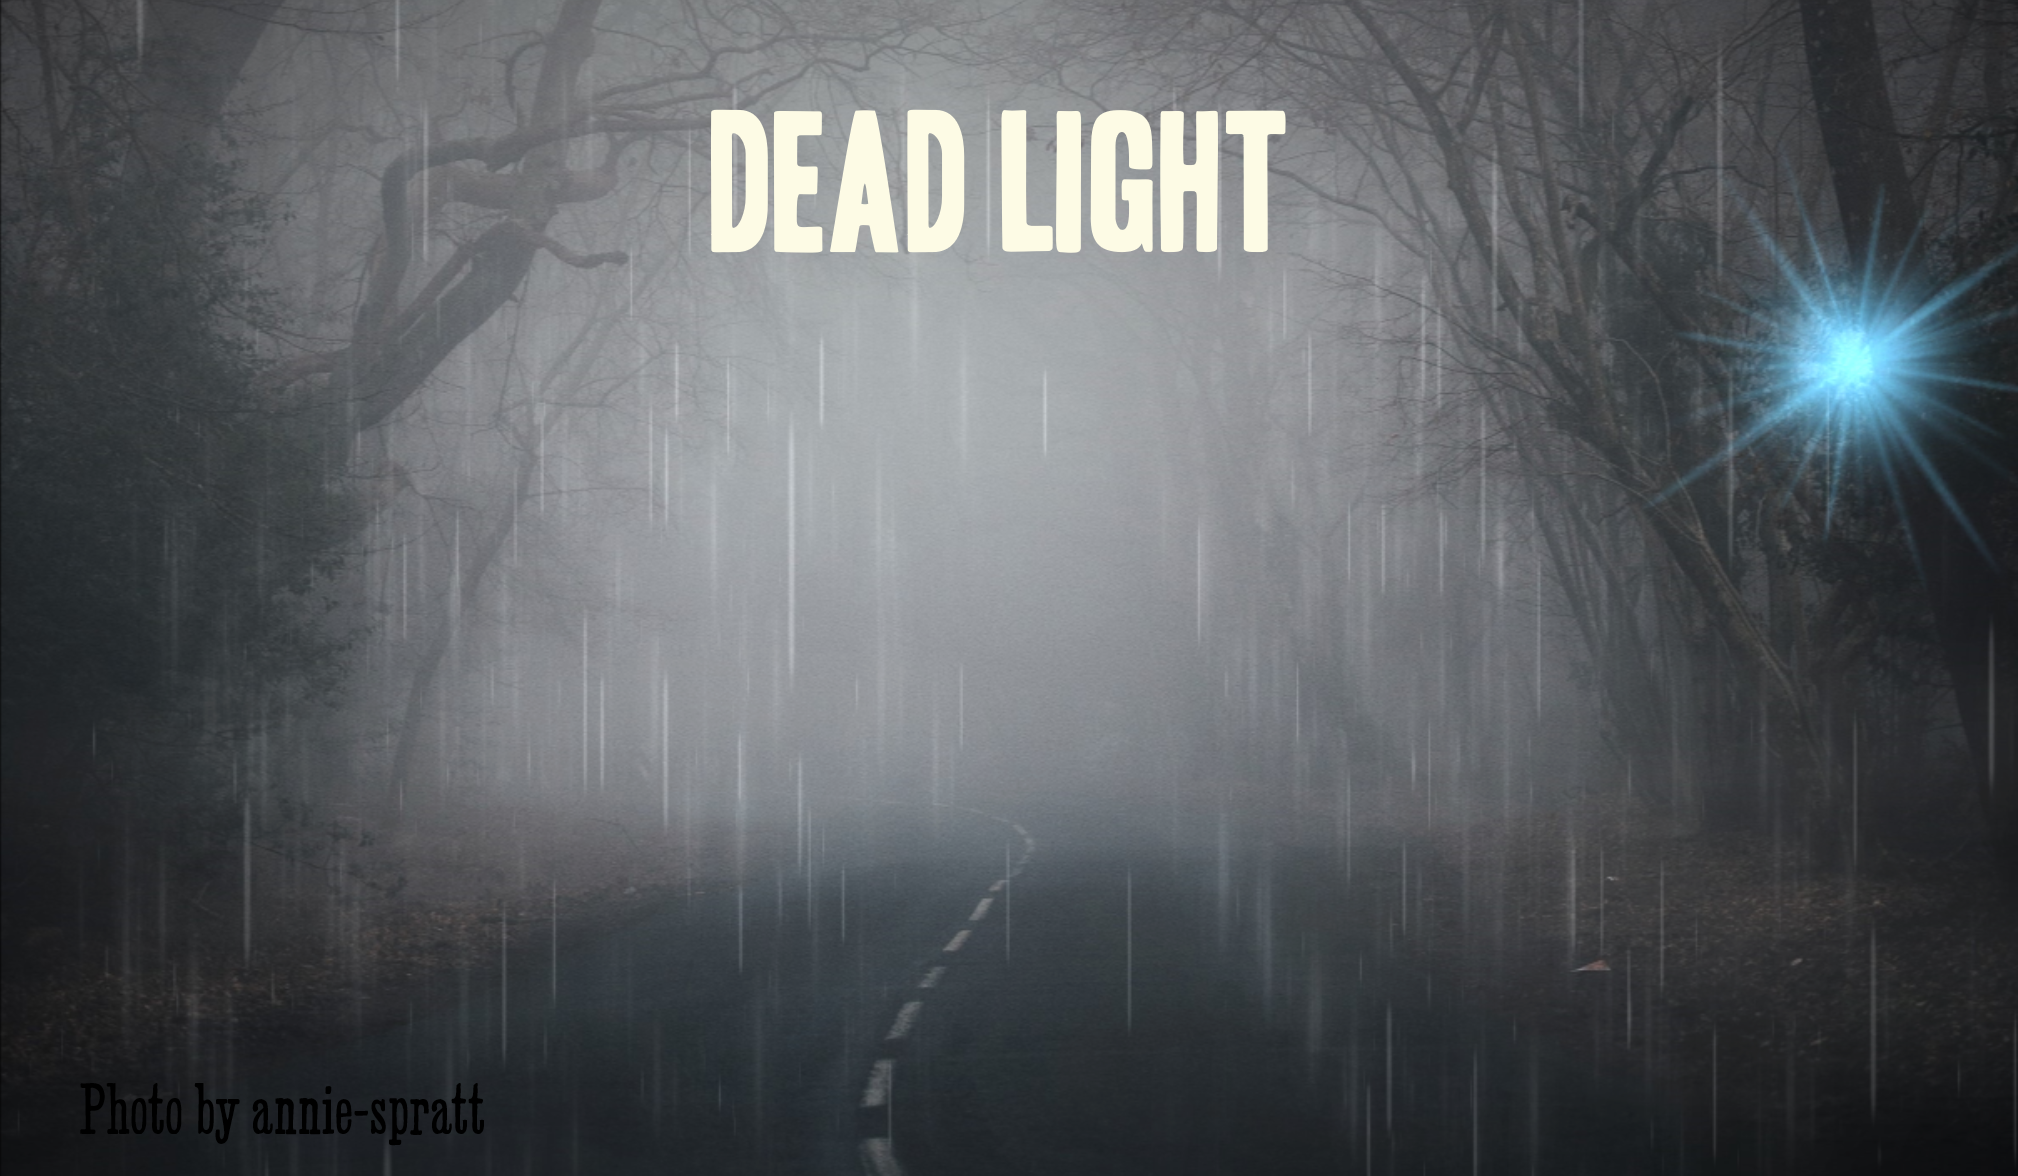 DEAD LIGHT - A Frightful Encounter On The Road At Night